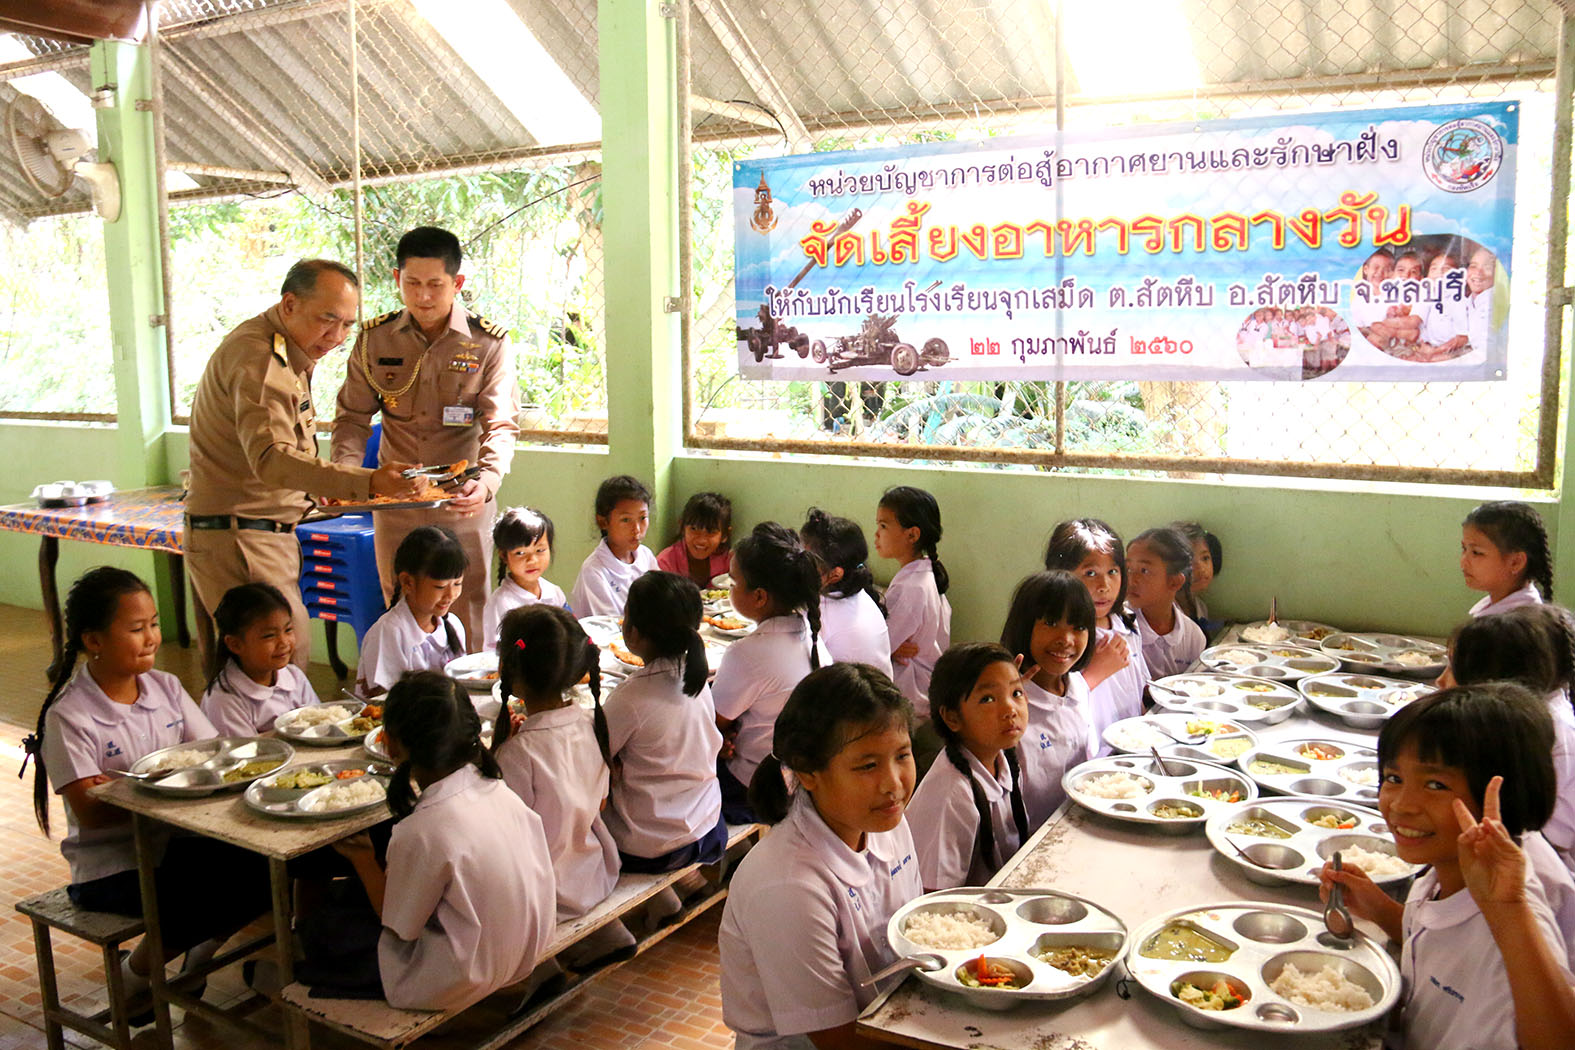 Rear Adm. Ekaraj Pornhomlampak, commander of Air and Coastal Defense Command, also helped feed the students at lunchtime.